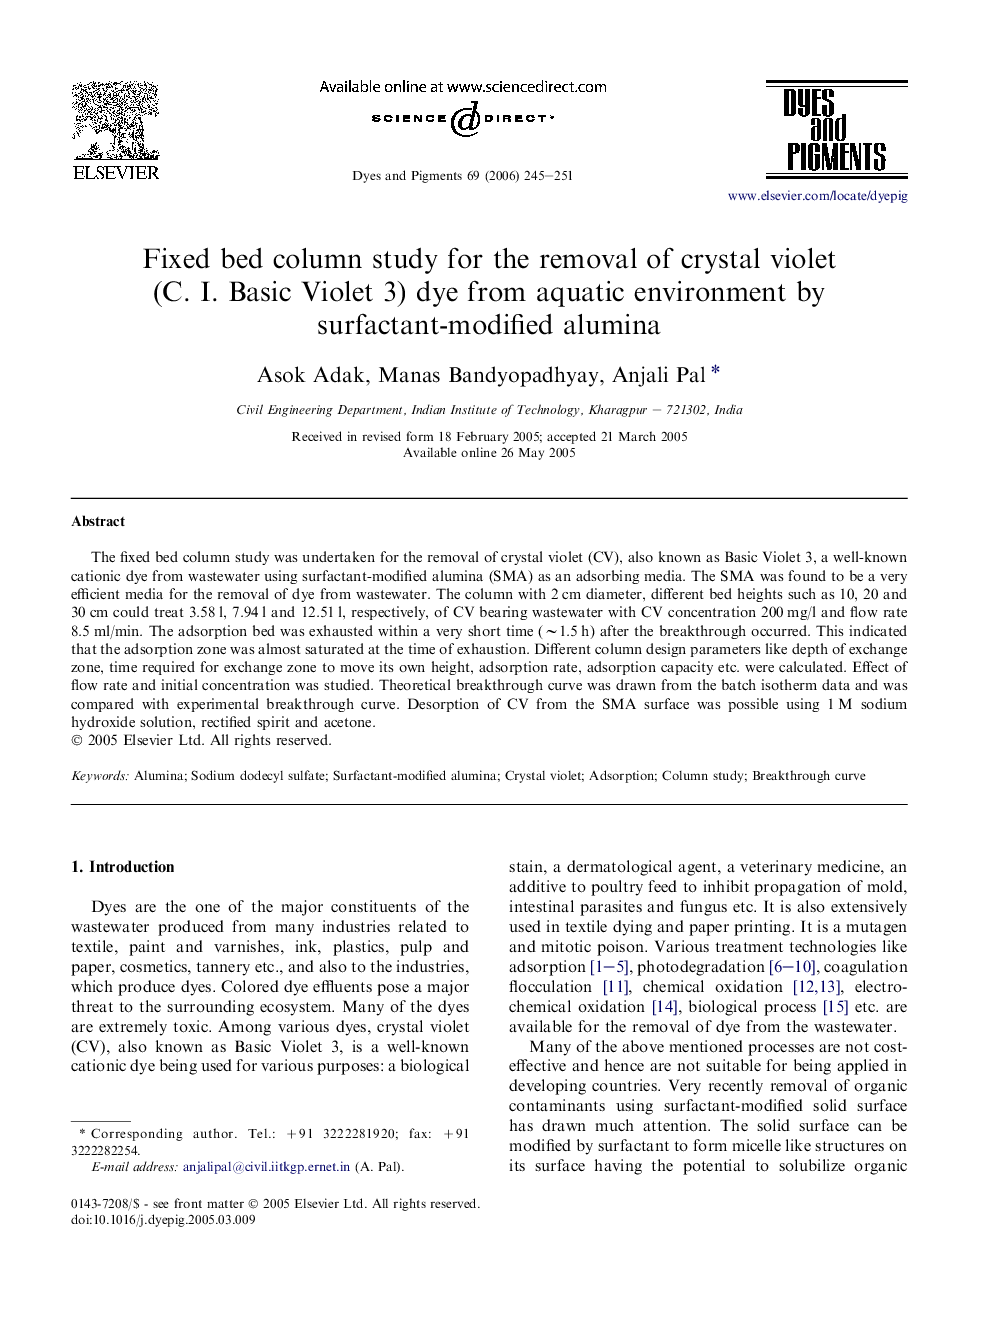 Fixed bed column study for the removal of crystal violet (C. I. Basic Violet 3) dye from aquatic environment by surfactant-modified alumina